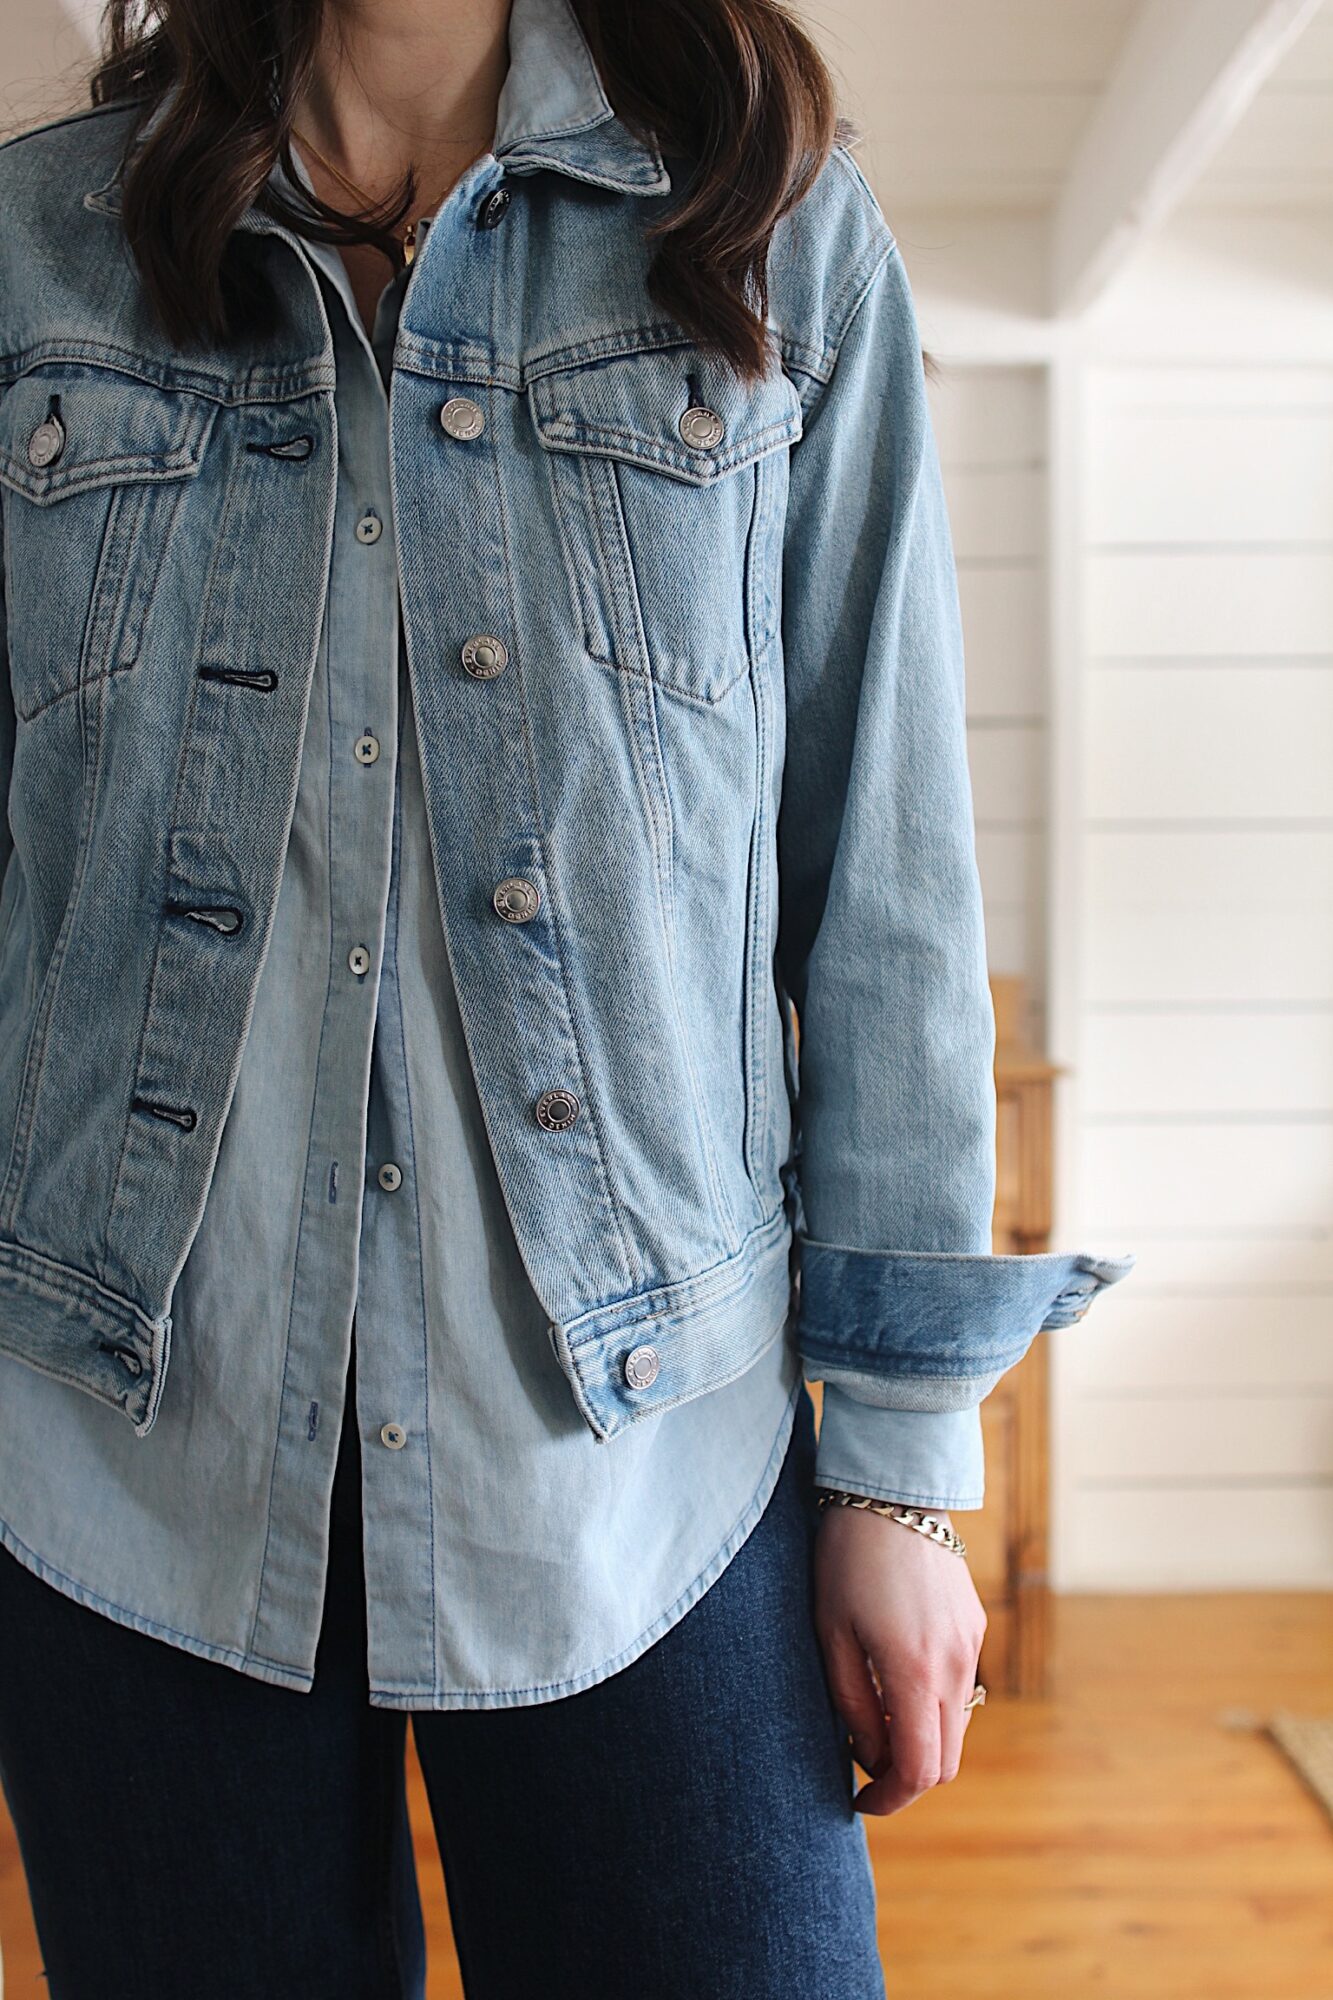 How to Style a Jean Jacket in 2023: 4 Easy Ideas to Try - Brightly